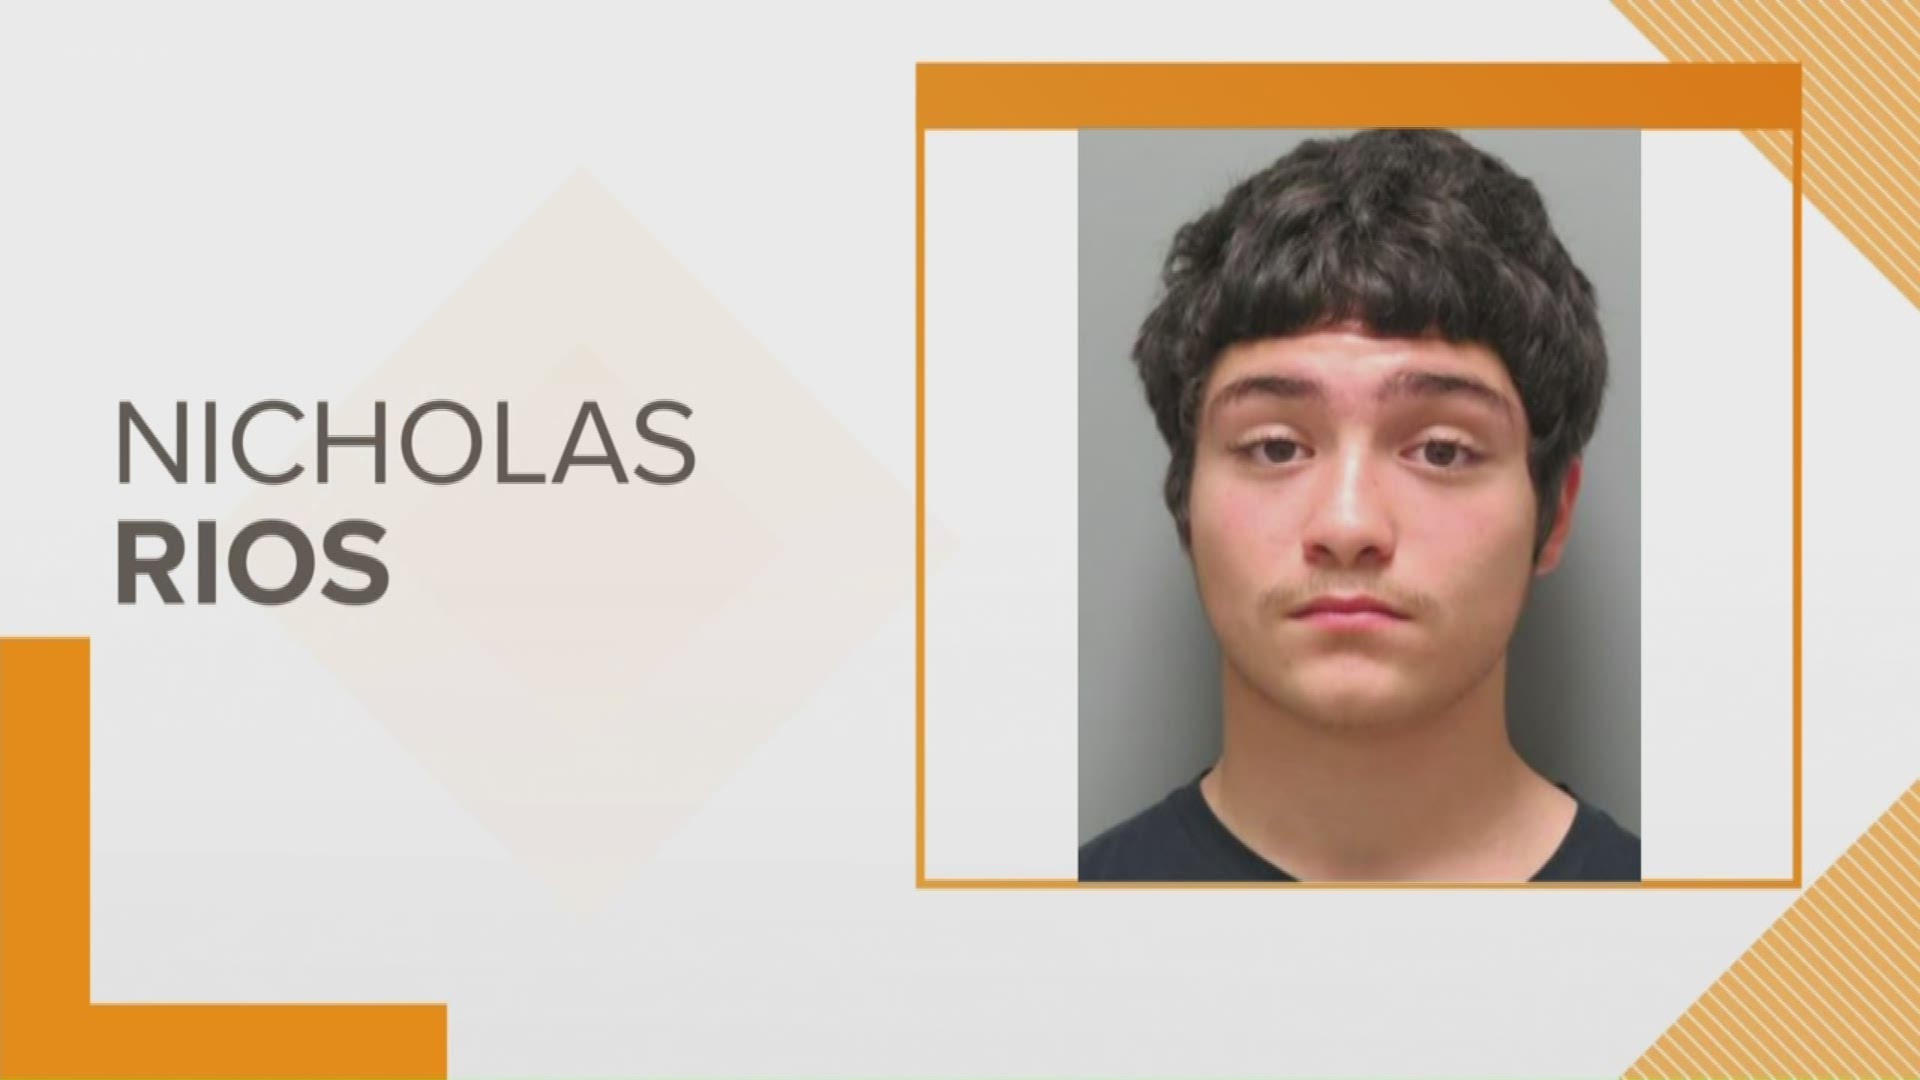 Officials with SCDJJ announced Thursday morning that 16-year-old Nicholas Rios has been apprehended and his back in custody.